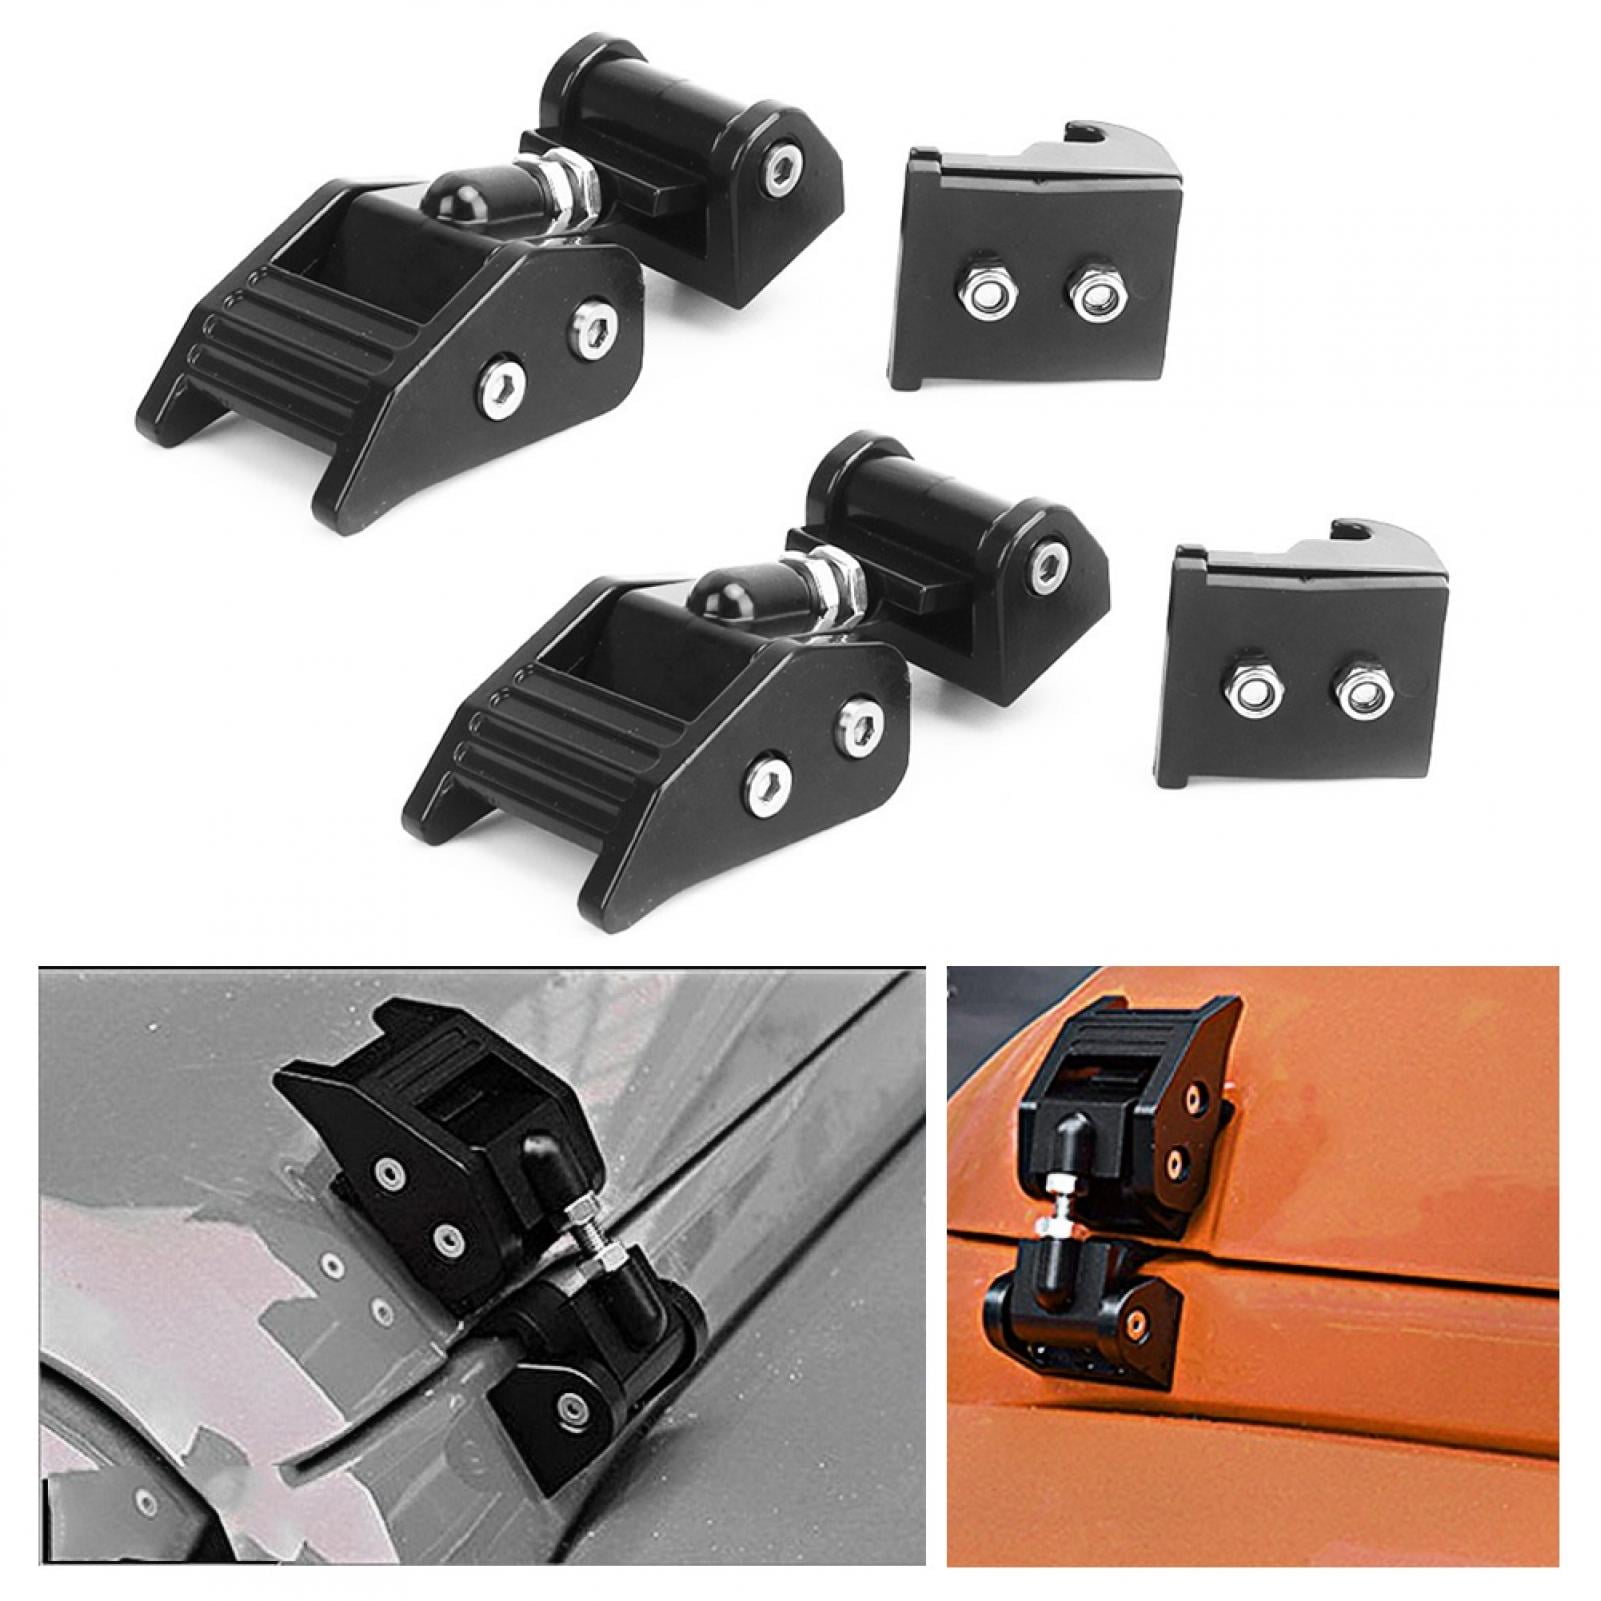 Pair of Auto Latch Locking Hood Catch Kit red Vintage Hood Latch Locking Catch Buckle Fits for Jeep Wrangler JK 2007-2017 